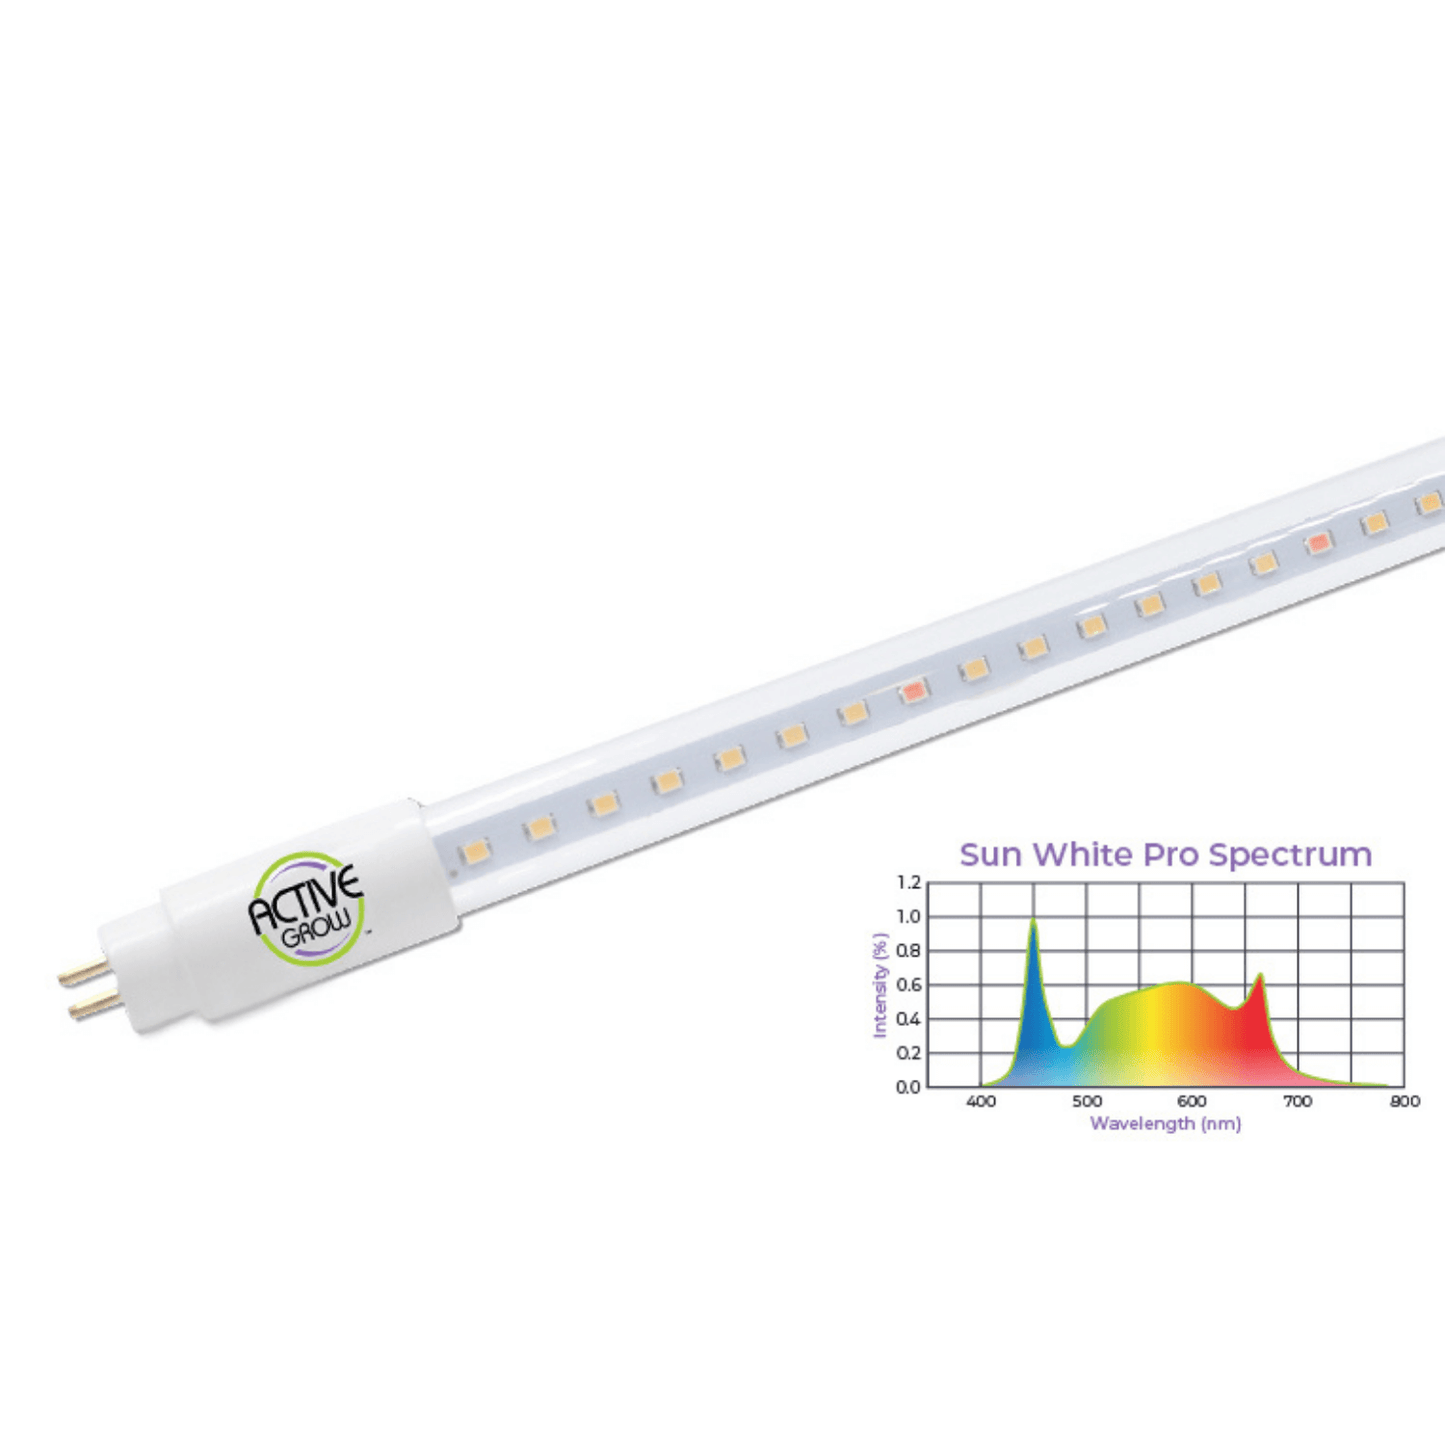 Active Grow 24W T5 HO 4FT Horticultural Lamp - Sun White Pro Spectrum AG/24T5HO/4FT/PS/4 Grow Lights 752505498799